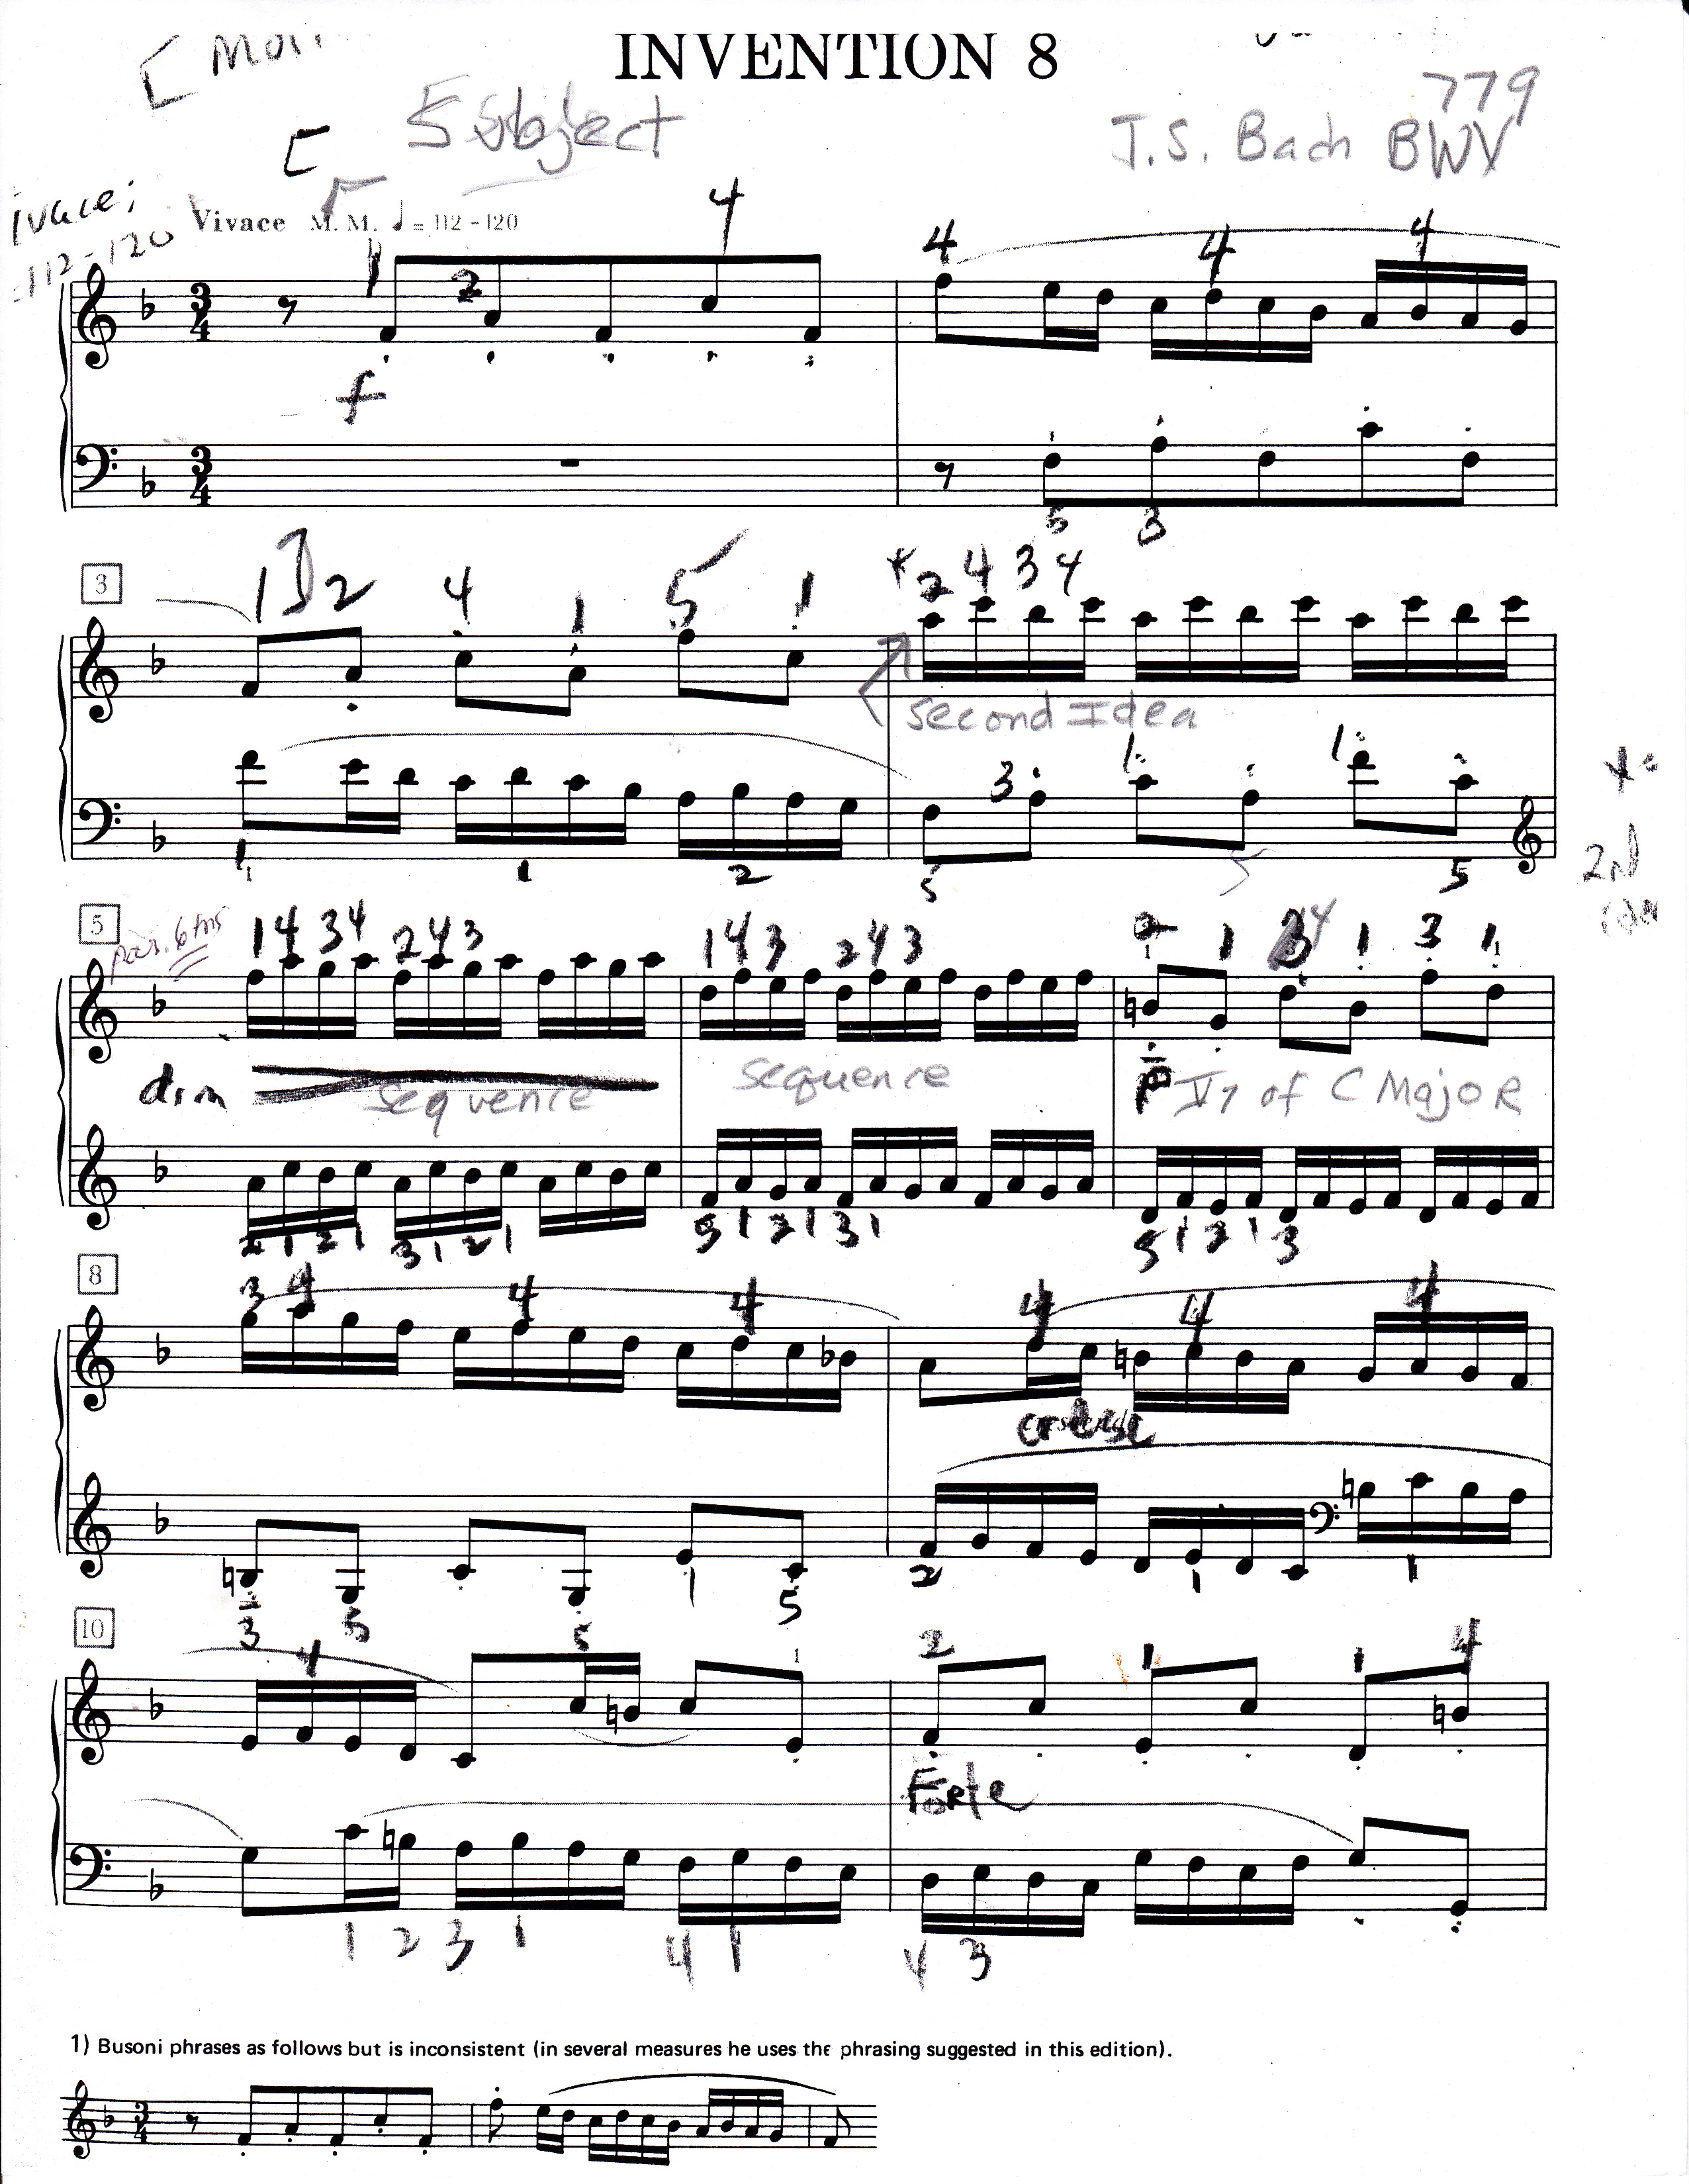 Piano Instruction: J.S. Bach Invention no. 8 in F, BWV 779, using